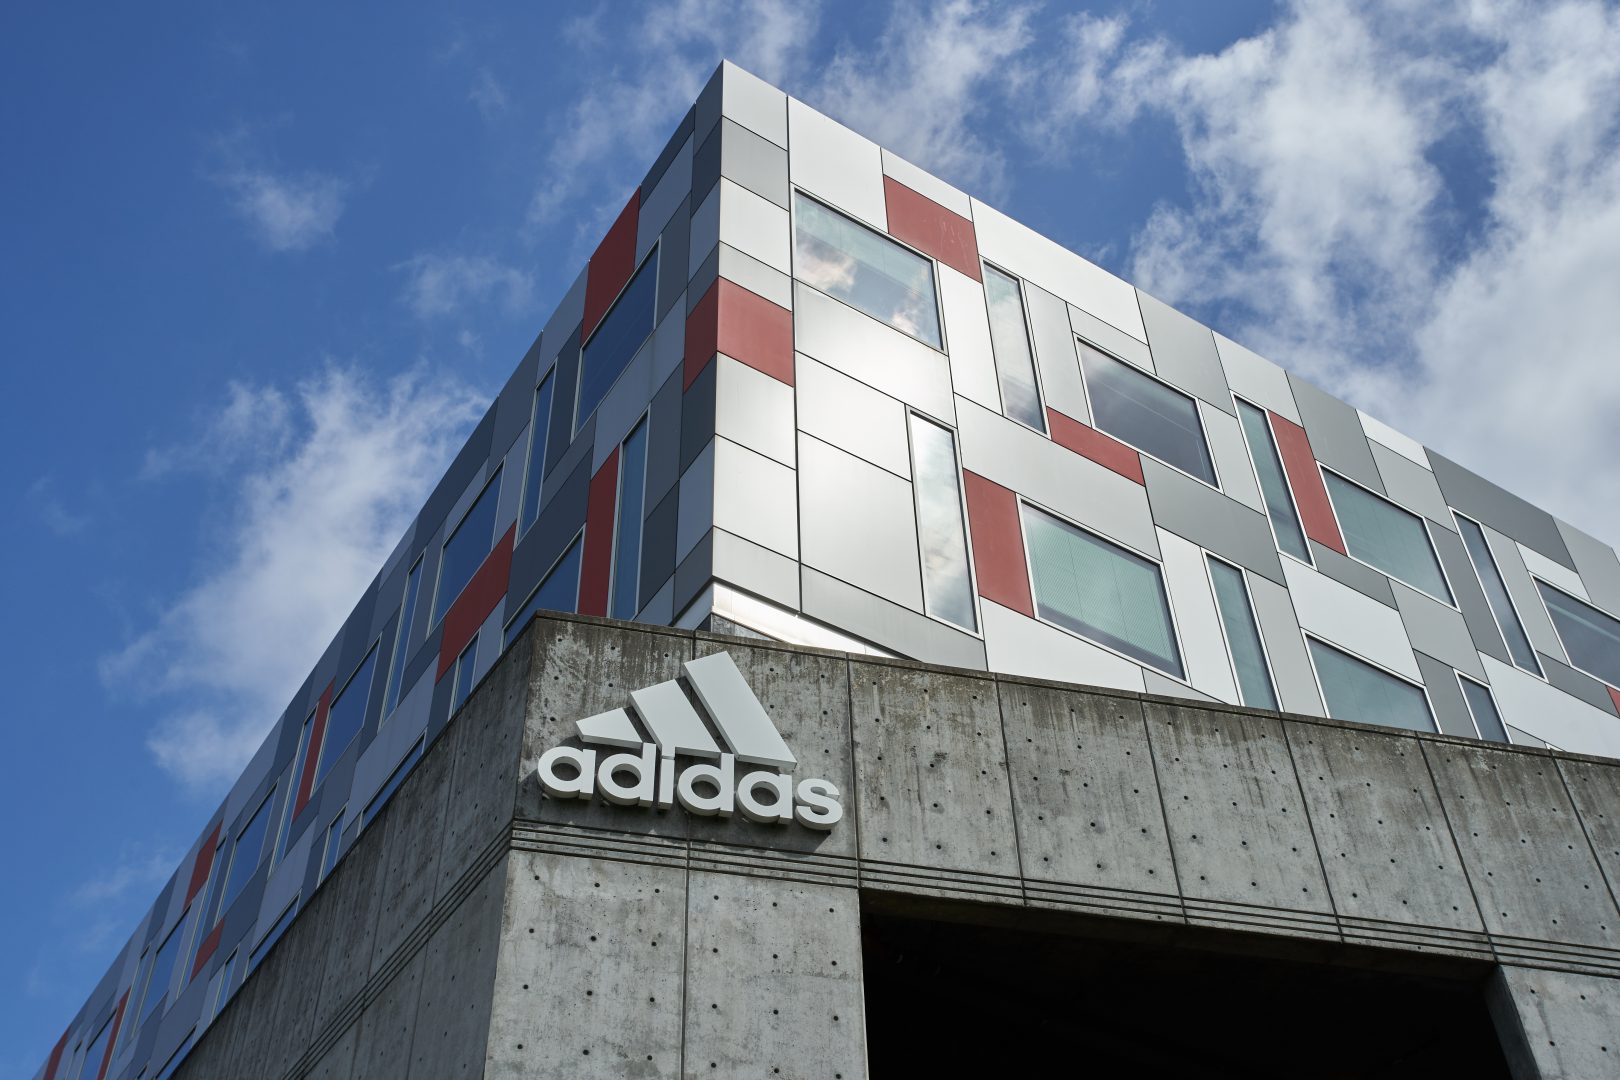 Adidas reportedly promotes urban culture while failing to hire Black employees